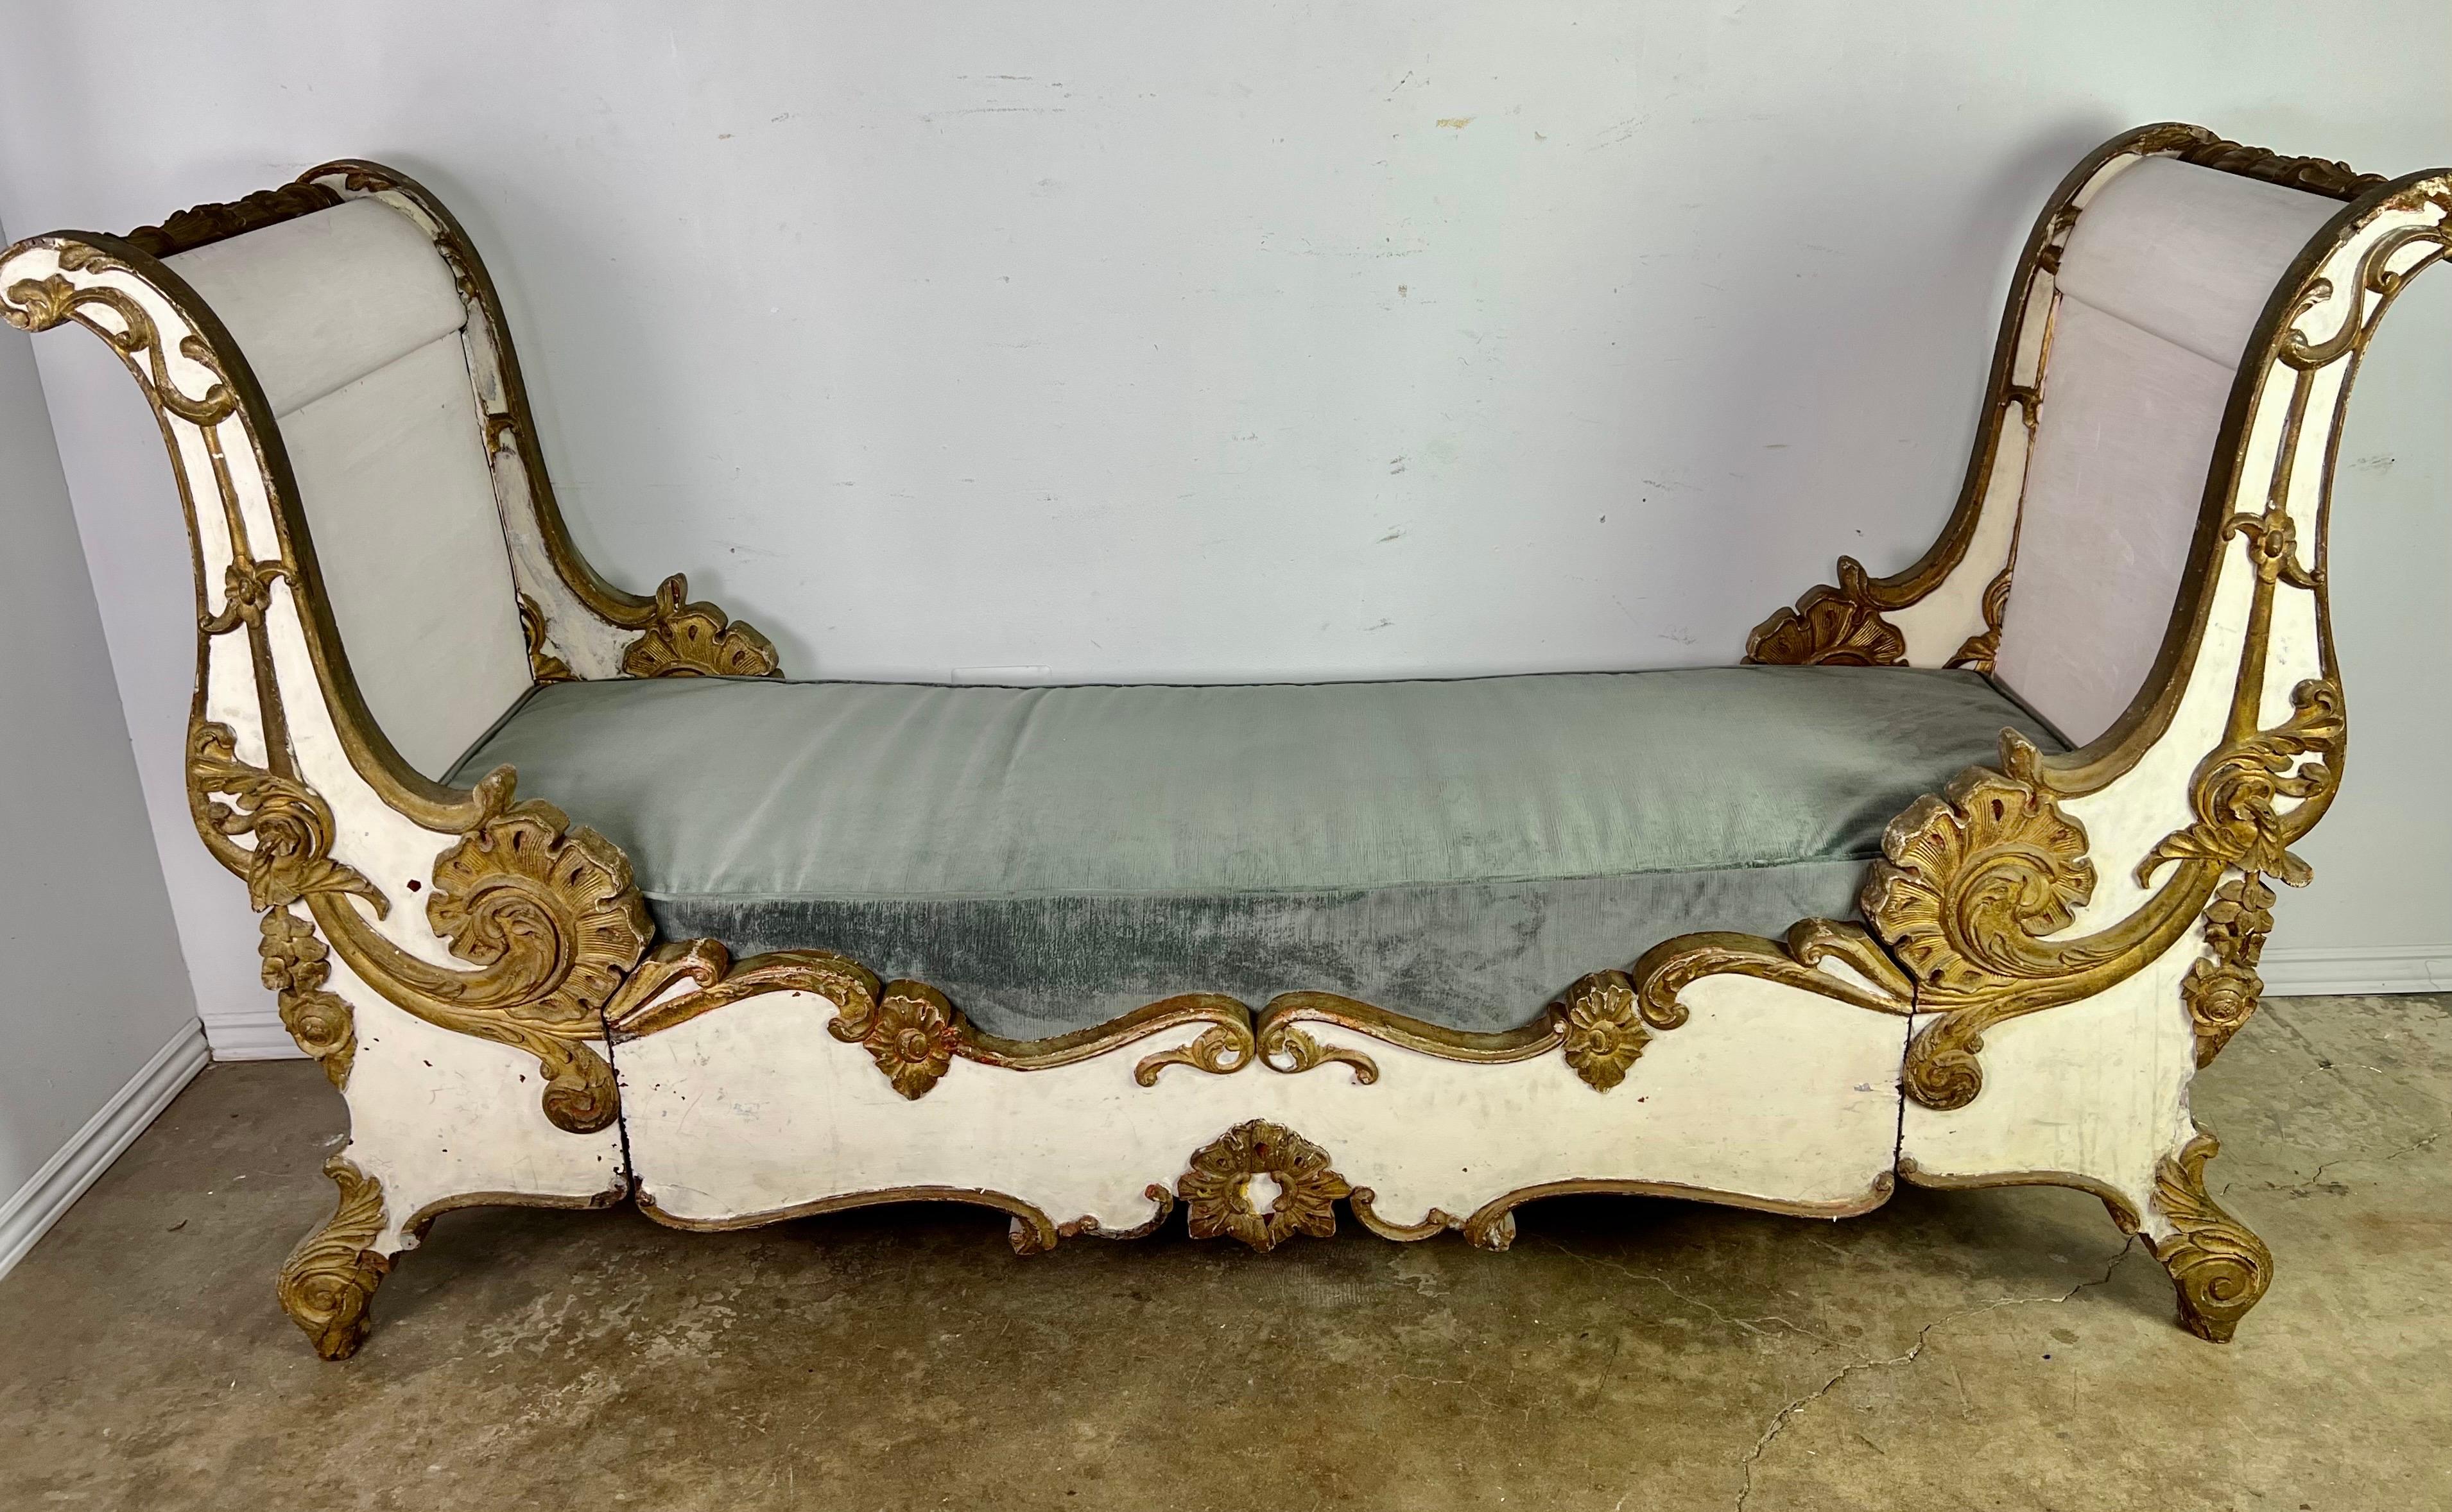 19th C. French Rococo style carved wood daybed. The piece is painted white with gold leaf on the raised carved areas of the bed frame. It is decorated with a floral wreath, acanthus leaf, and floral details throughout. We had a newly upholstered